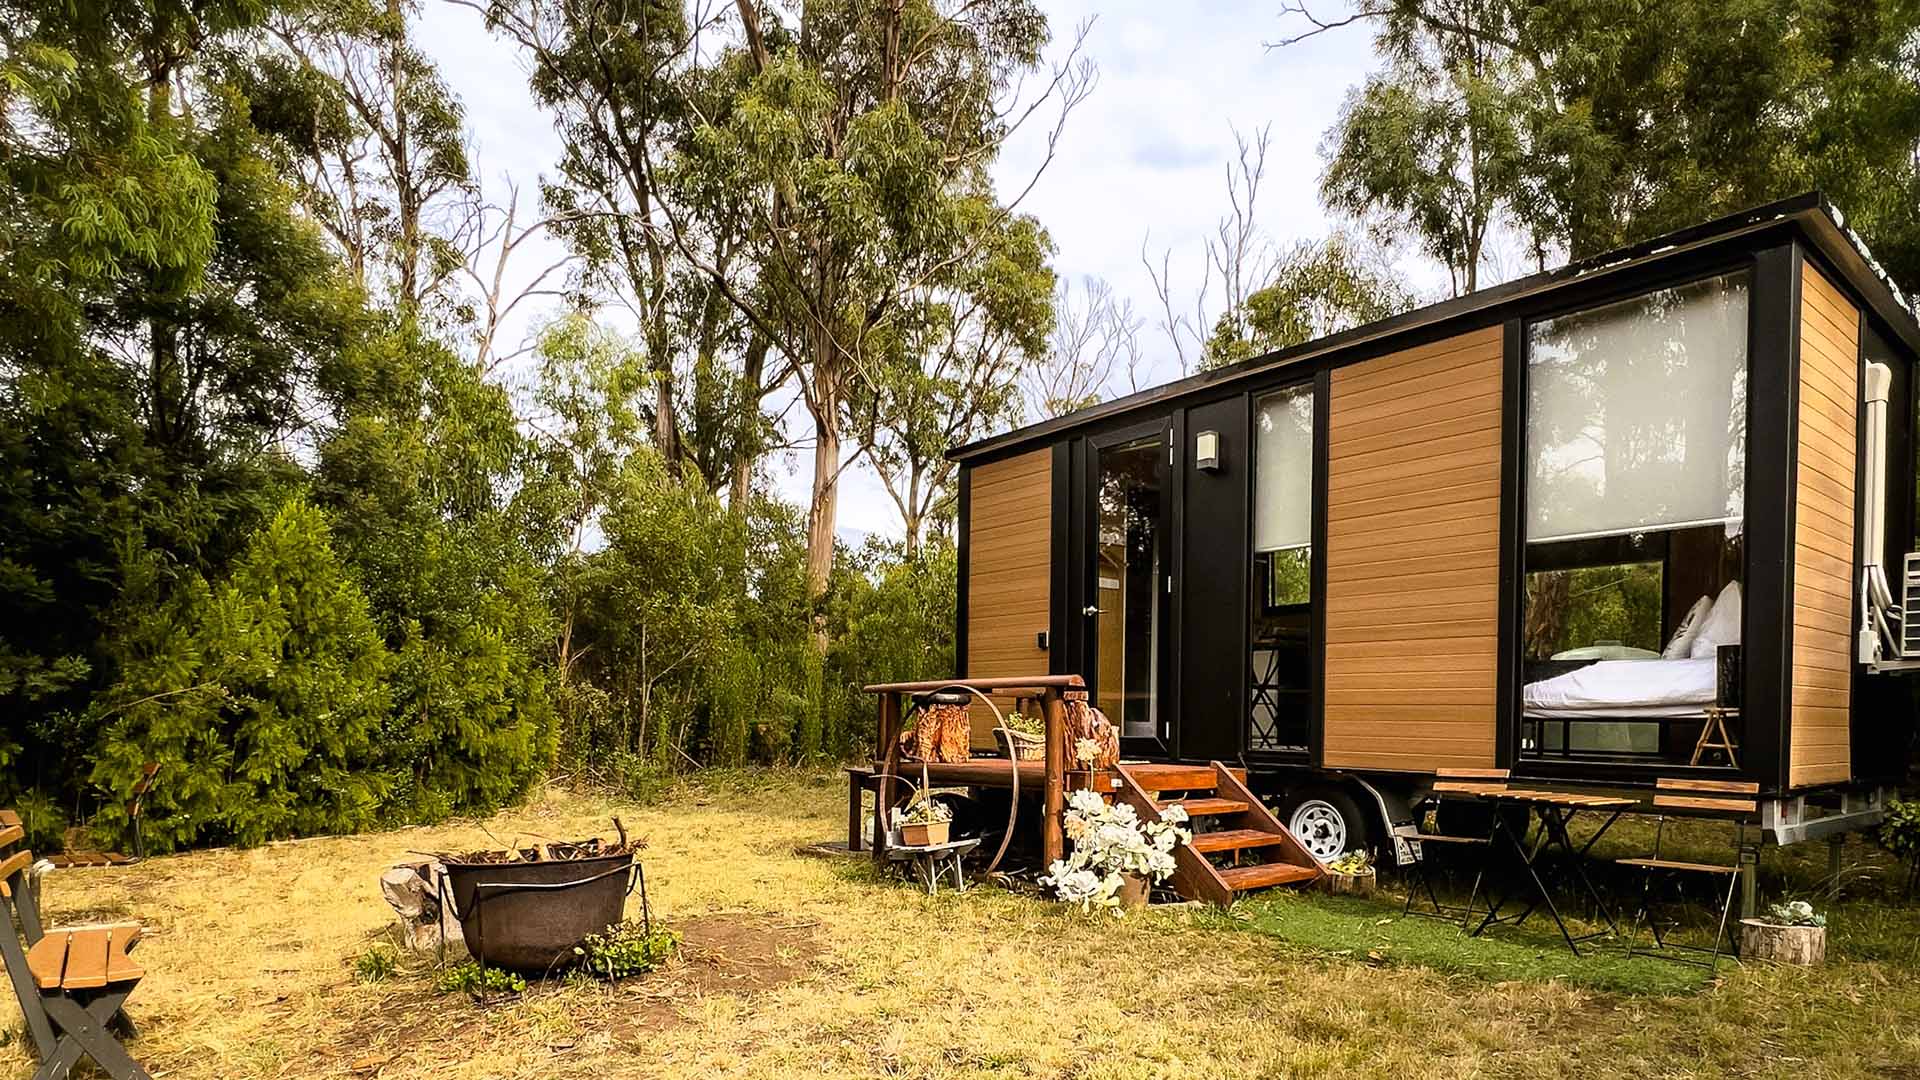 Tiny Away Has Just Launched Its First Two Tasmanian Tiny Houses for Scenic Apple Isle Getaways